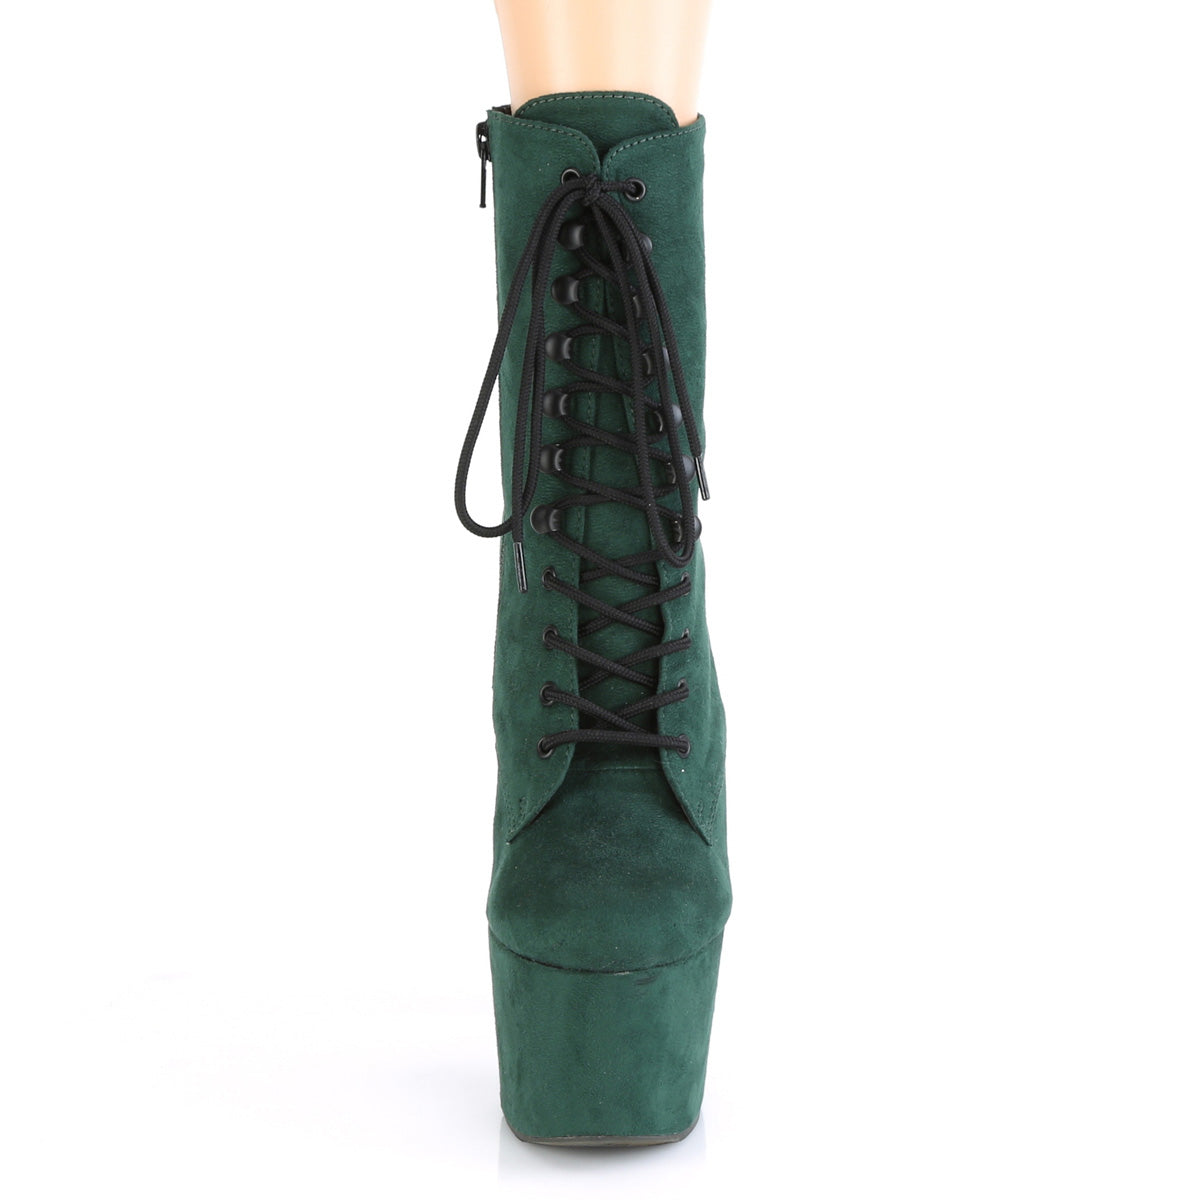 ADORE-1020FS Emerald Green Faux Suede Ankle Boot Pleaser